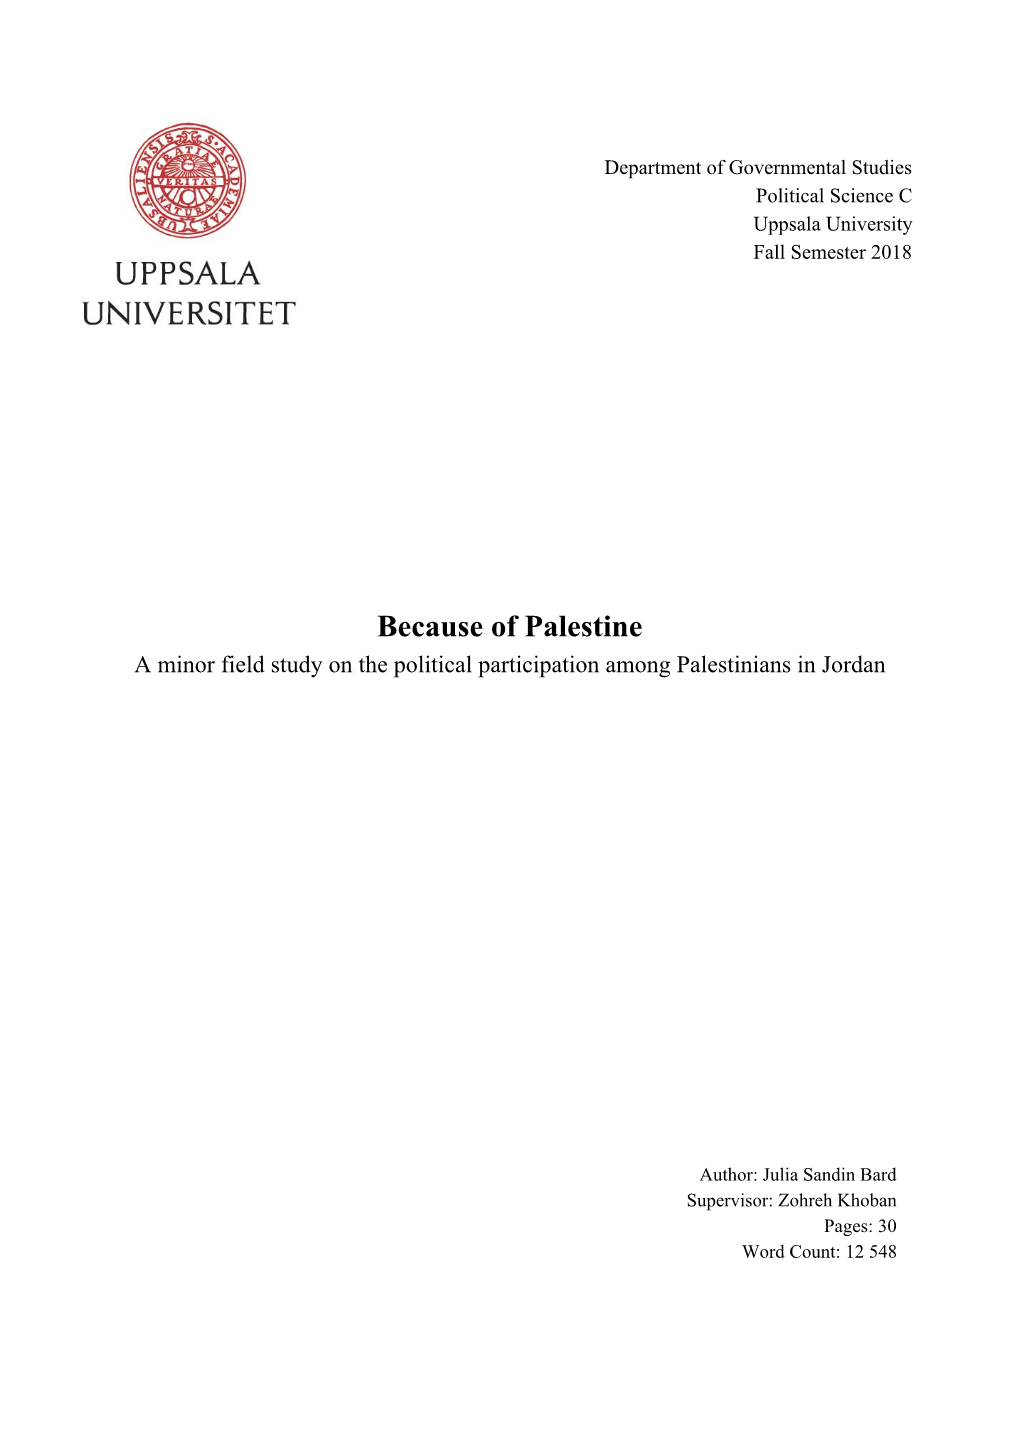 Because of Palestine a Minor Field Study on the Political Participation Among Palestinians in Jordan